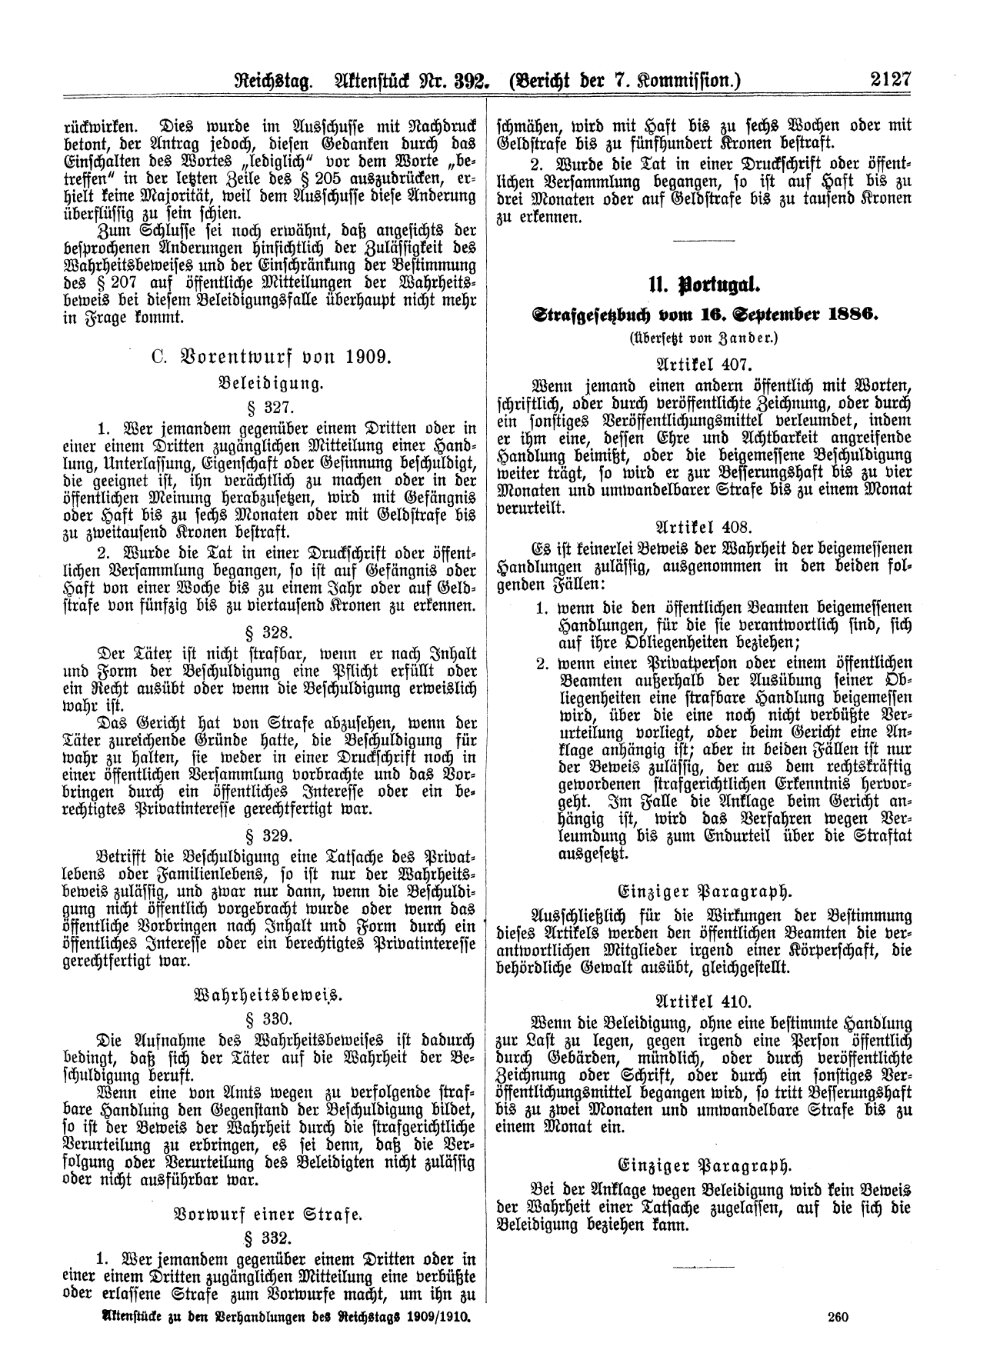 Scan of page 2127